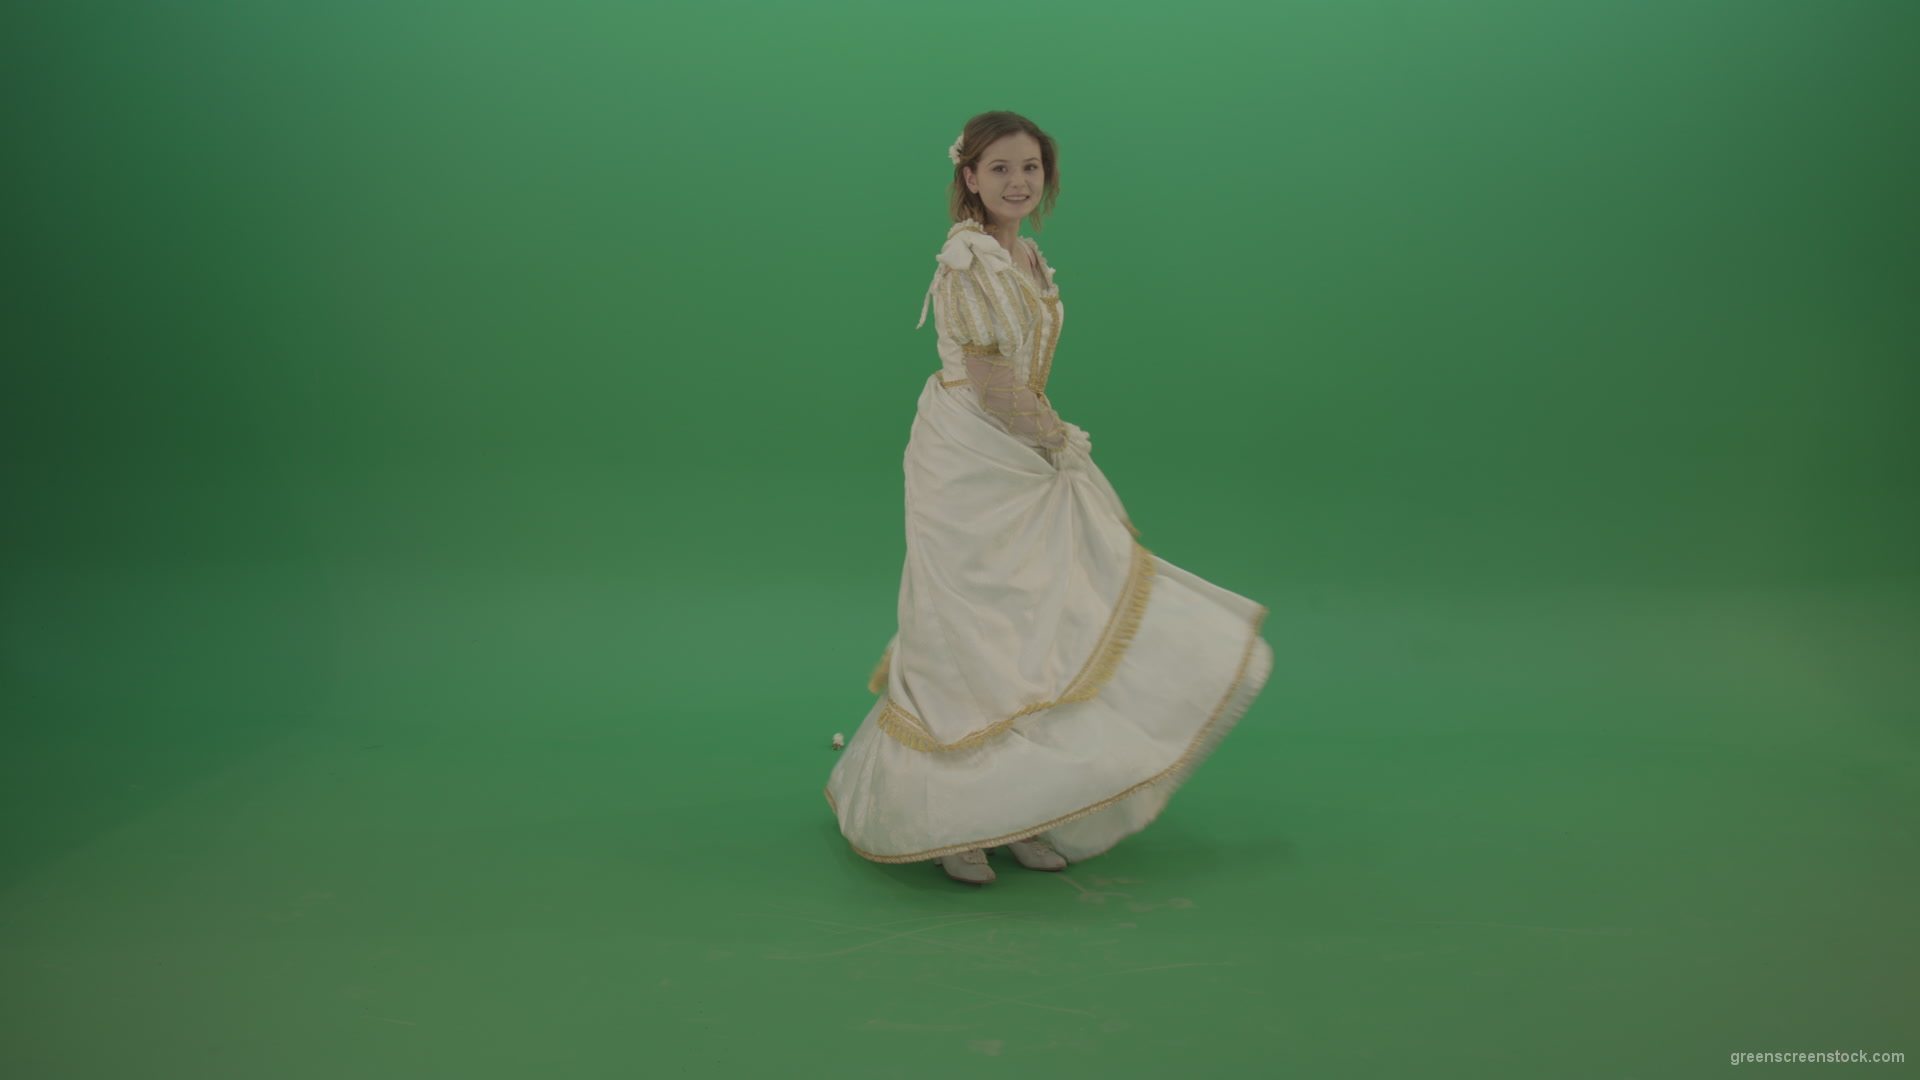 Merry-medieval-girl-dancing-and-rejoicing-isolated-on-green-background_007 Green Screen Stock